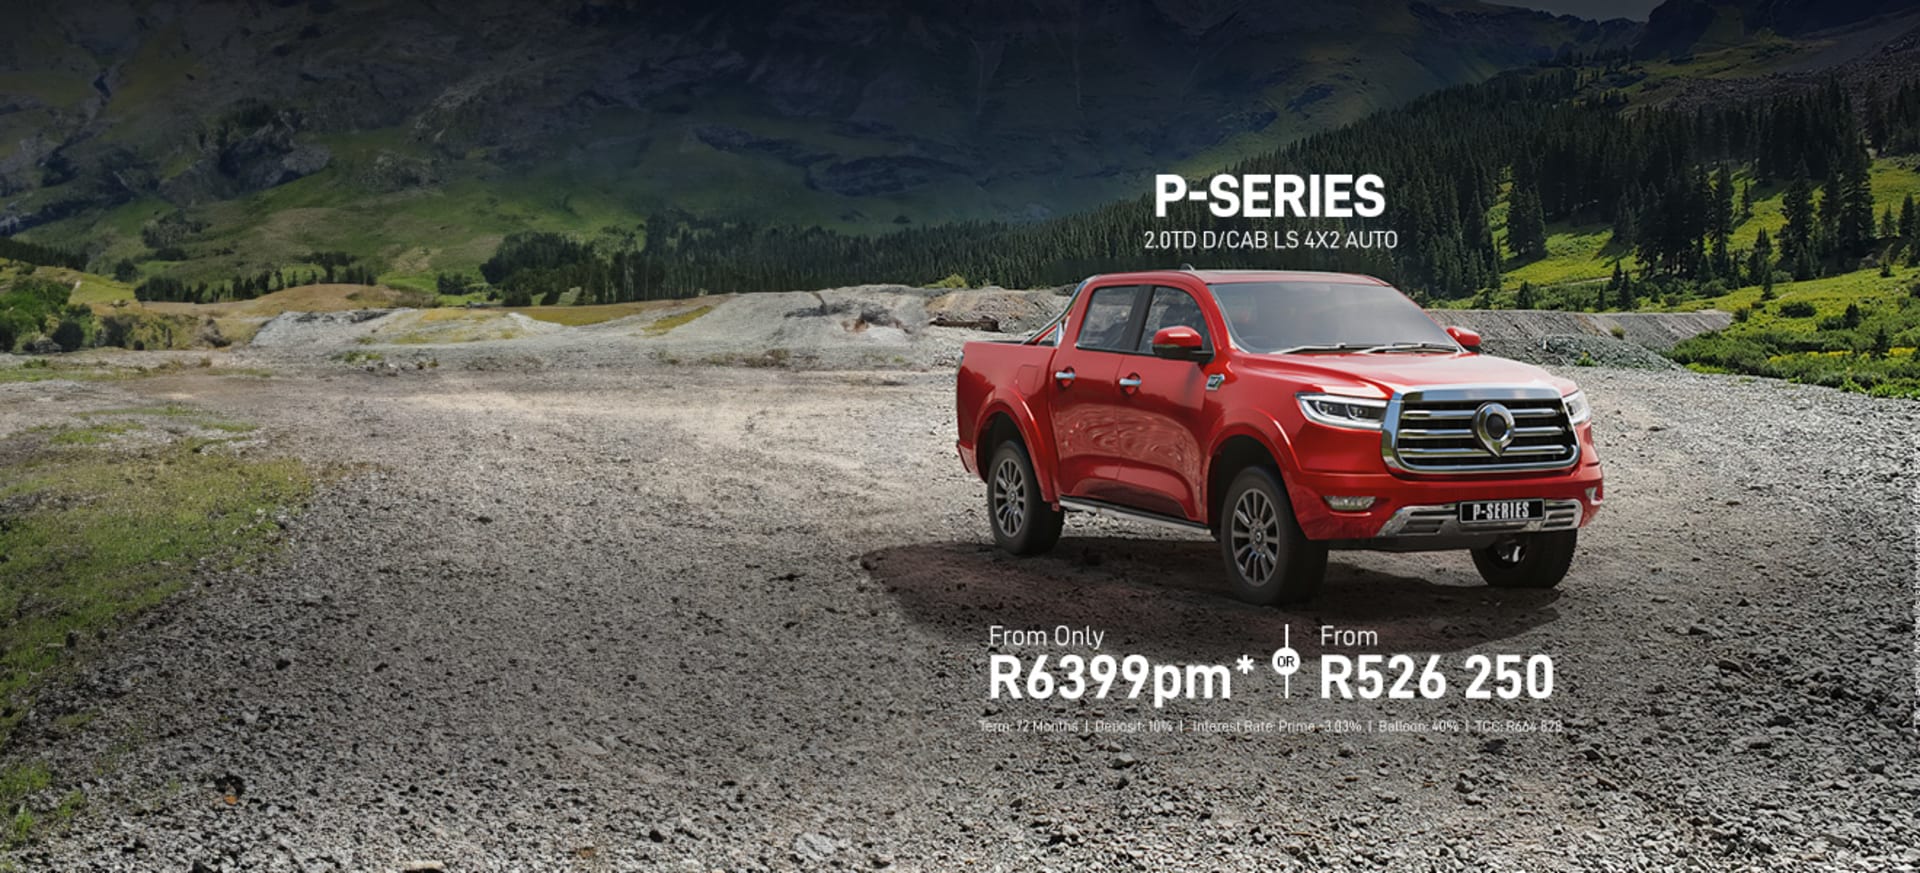 P-Series D/CAB 2.0TD LS 4x2 From R6399pm*